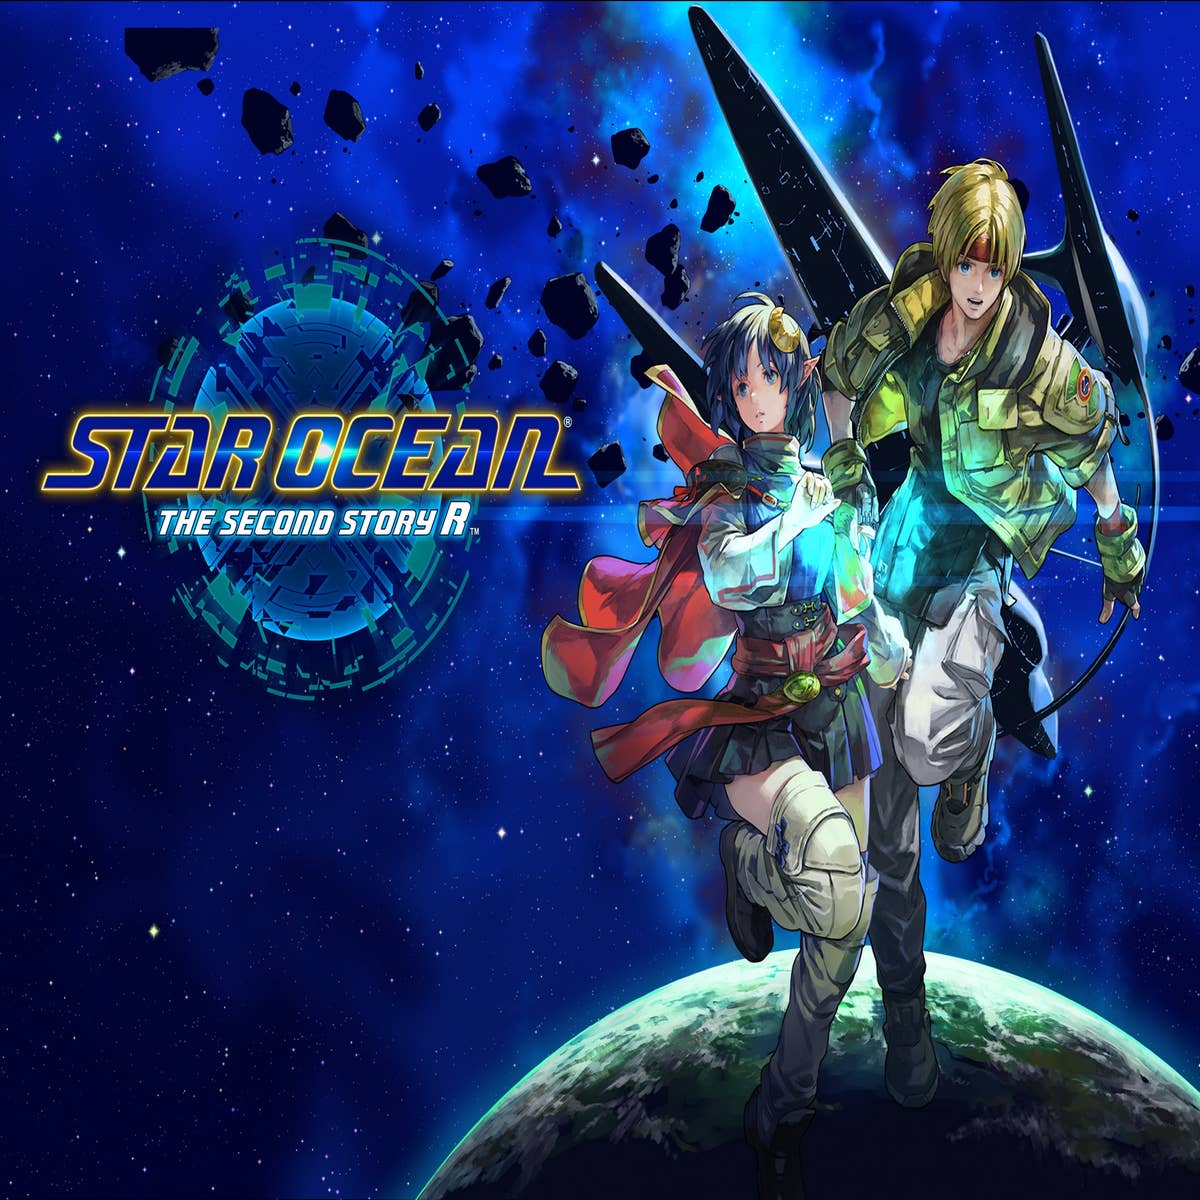 Star Ocean: The Second Story R will bring the '90s PlayStation RPG to PC  with a hot new 2.5D look